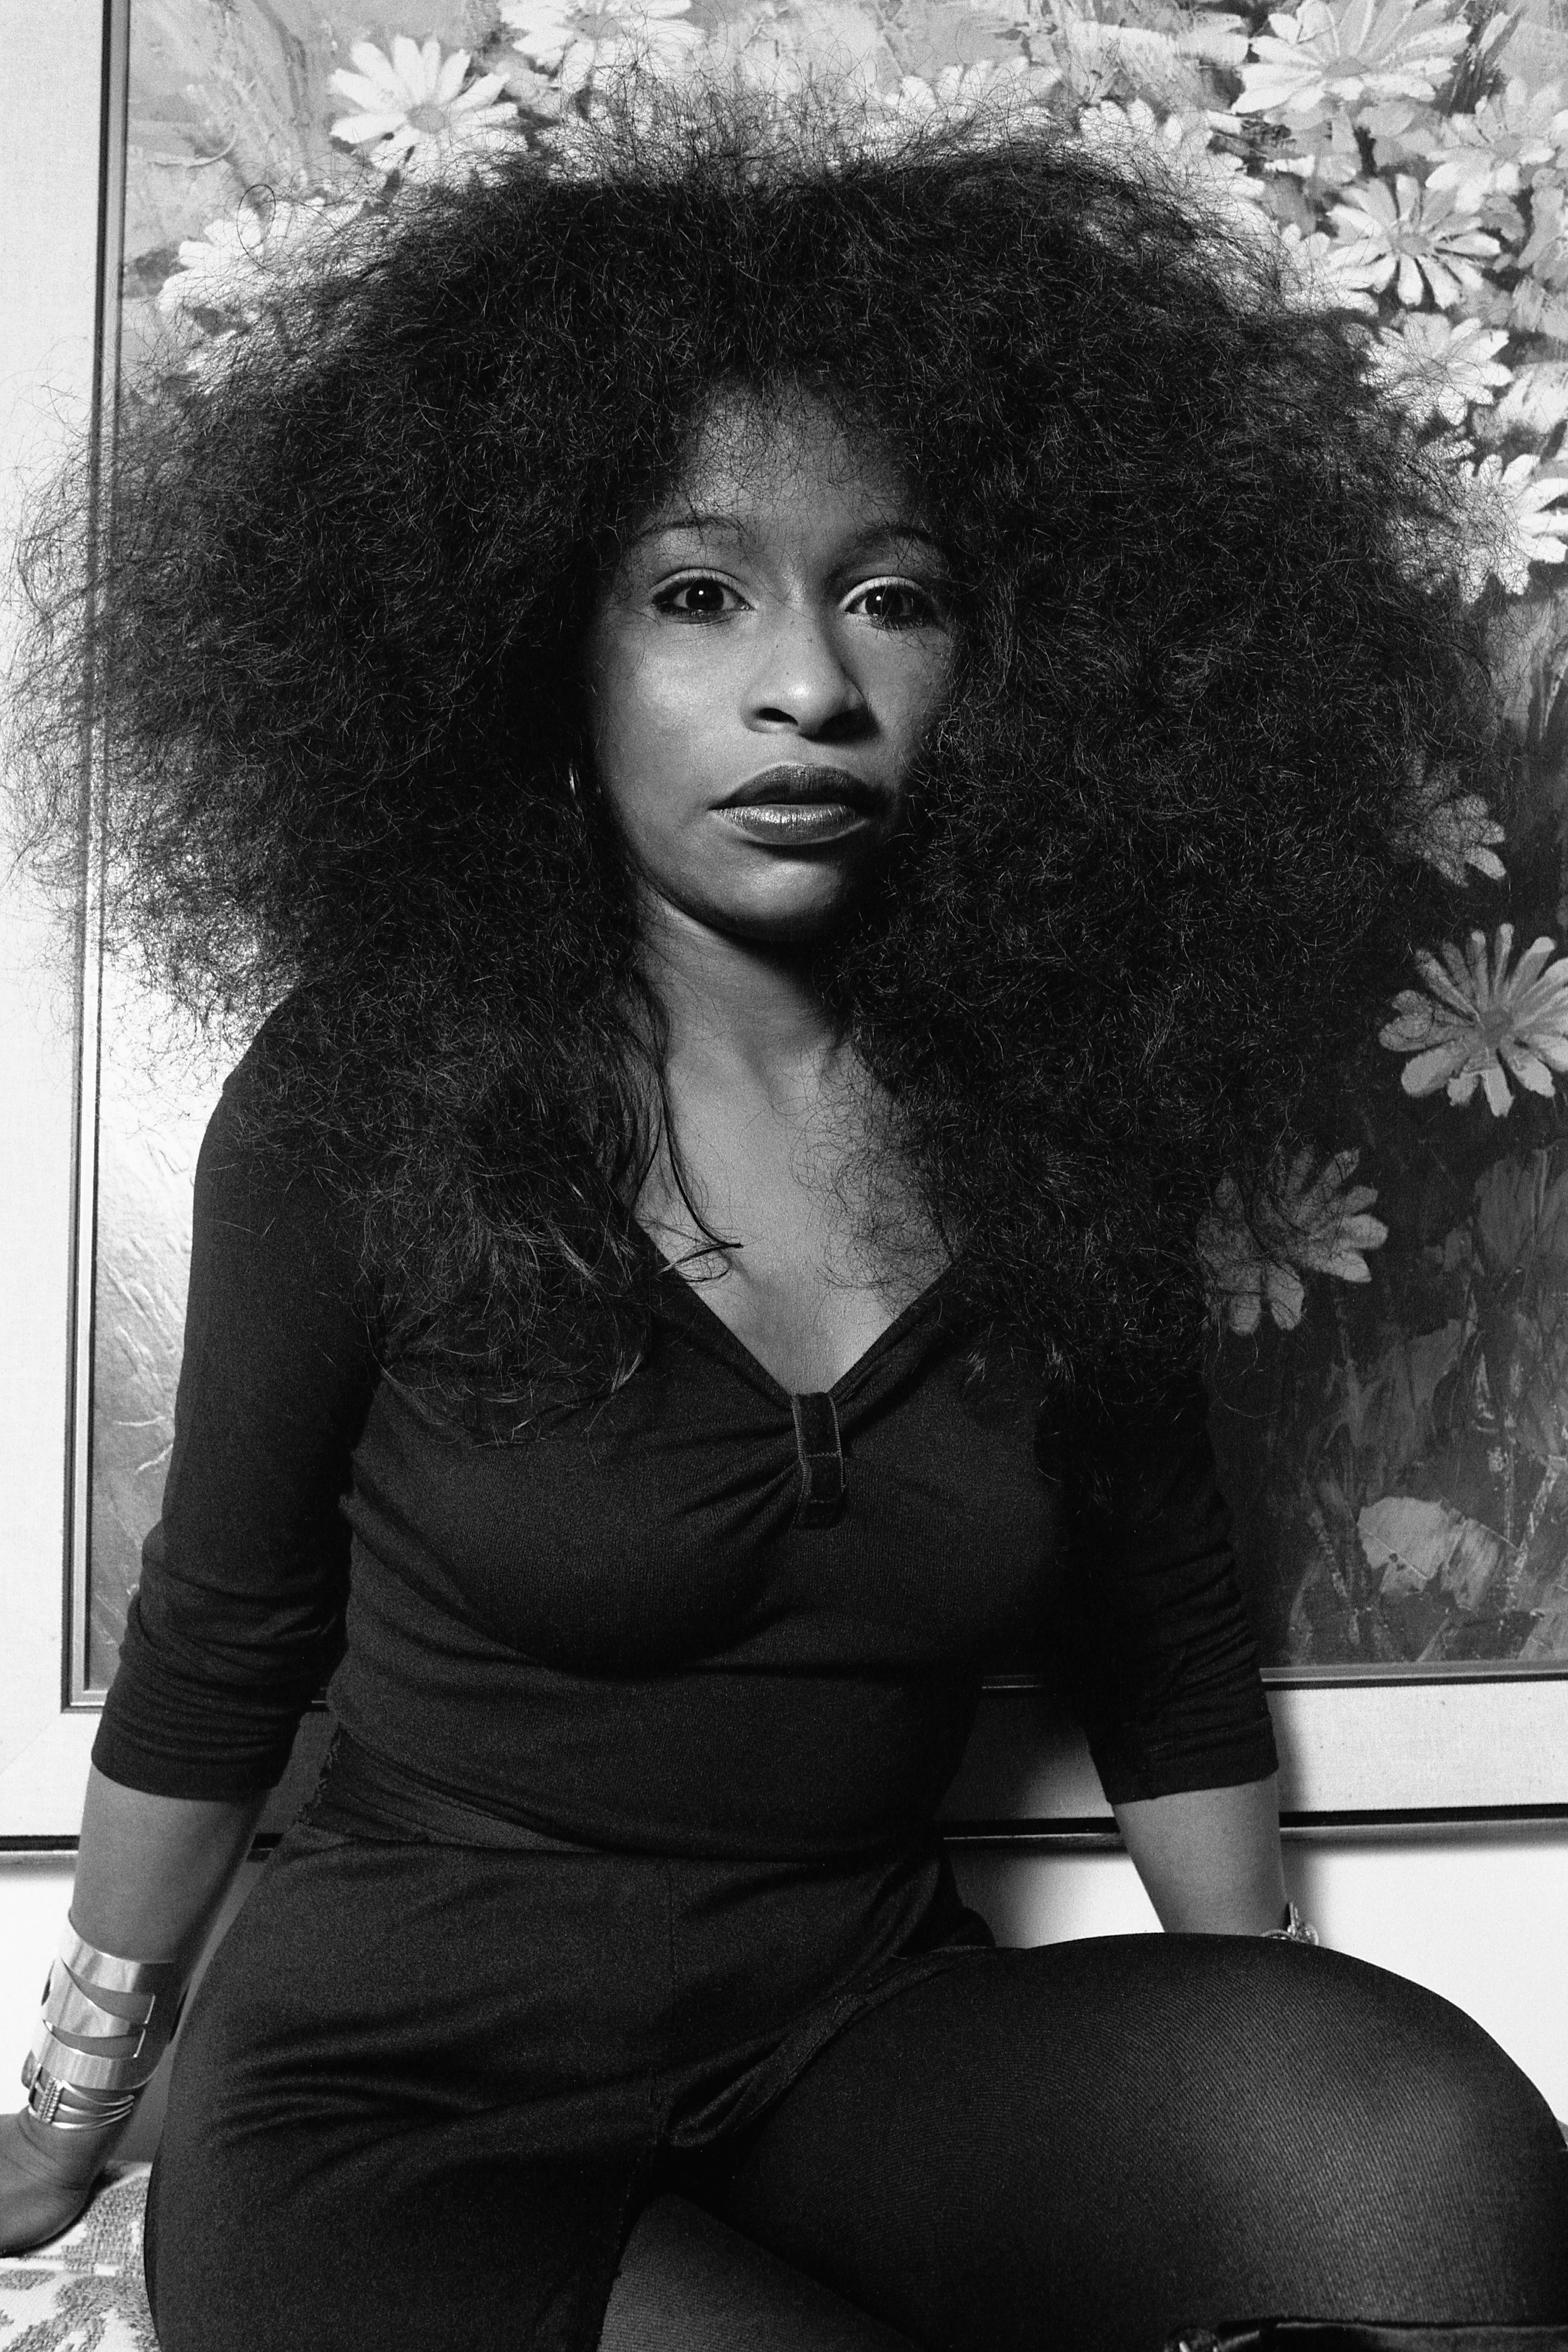 A portrait of Chaka Khan in her New York City hotel room in the 1970s | Source: Getty Images